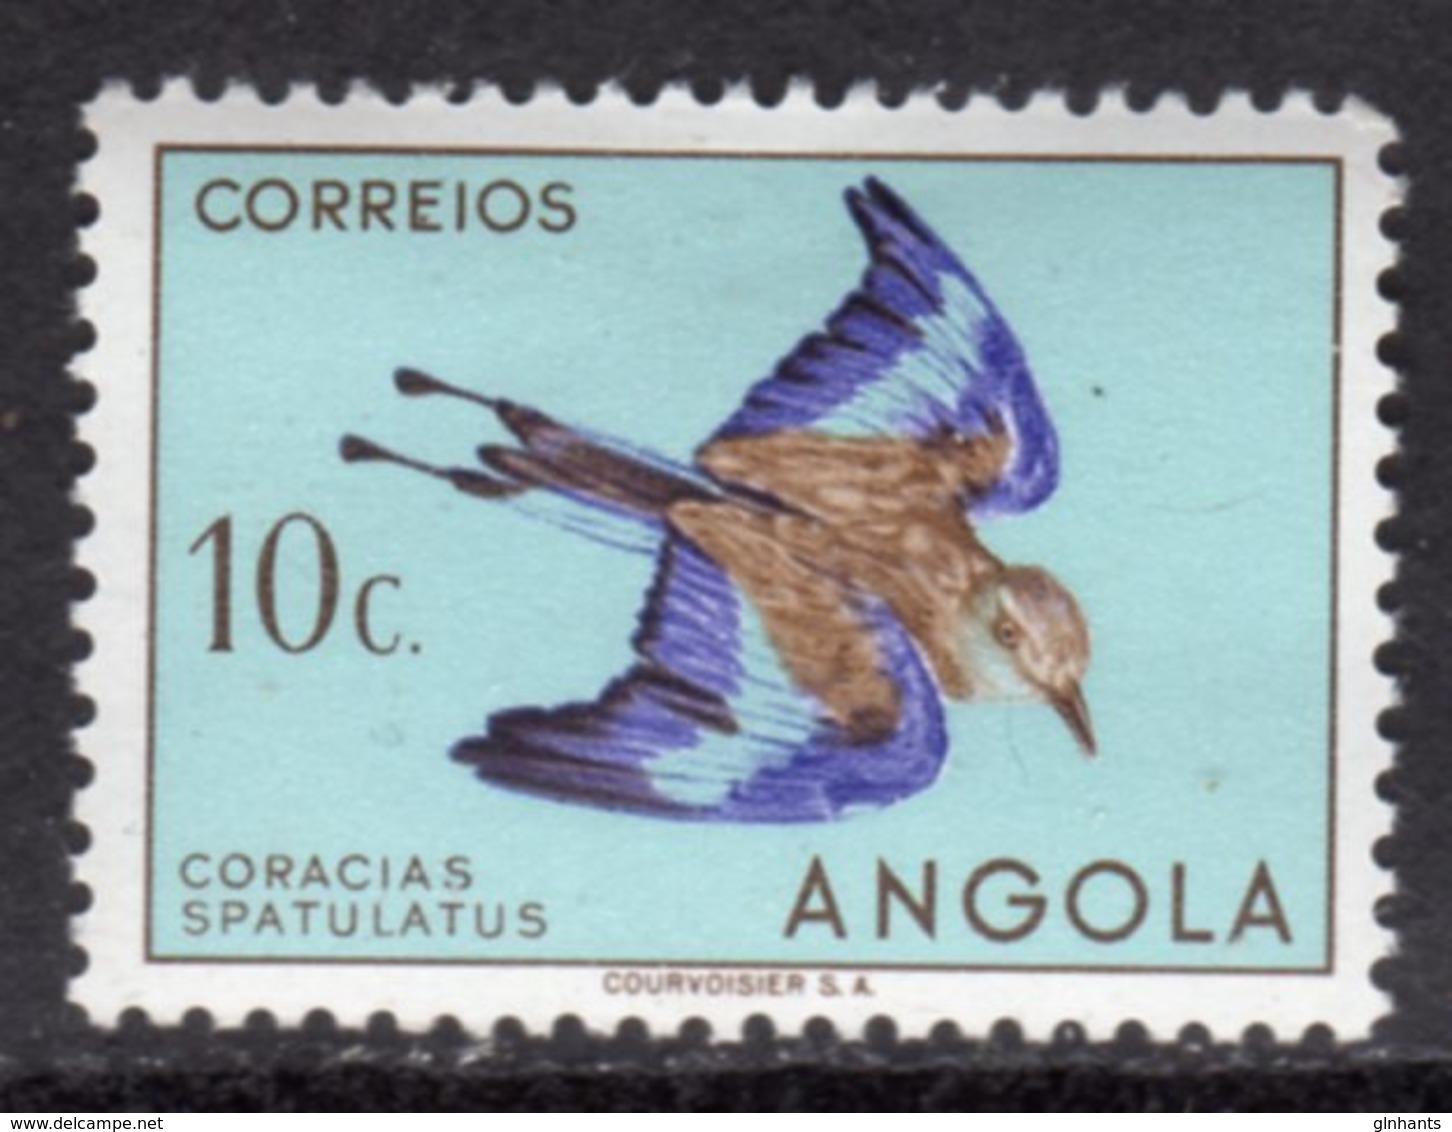 ANGOLA - 1951 10c RACQUET-TAILED ROLLER BIRD STAMP MOUNTED MINT MM * SG 459 - Angola